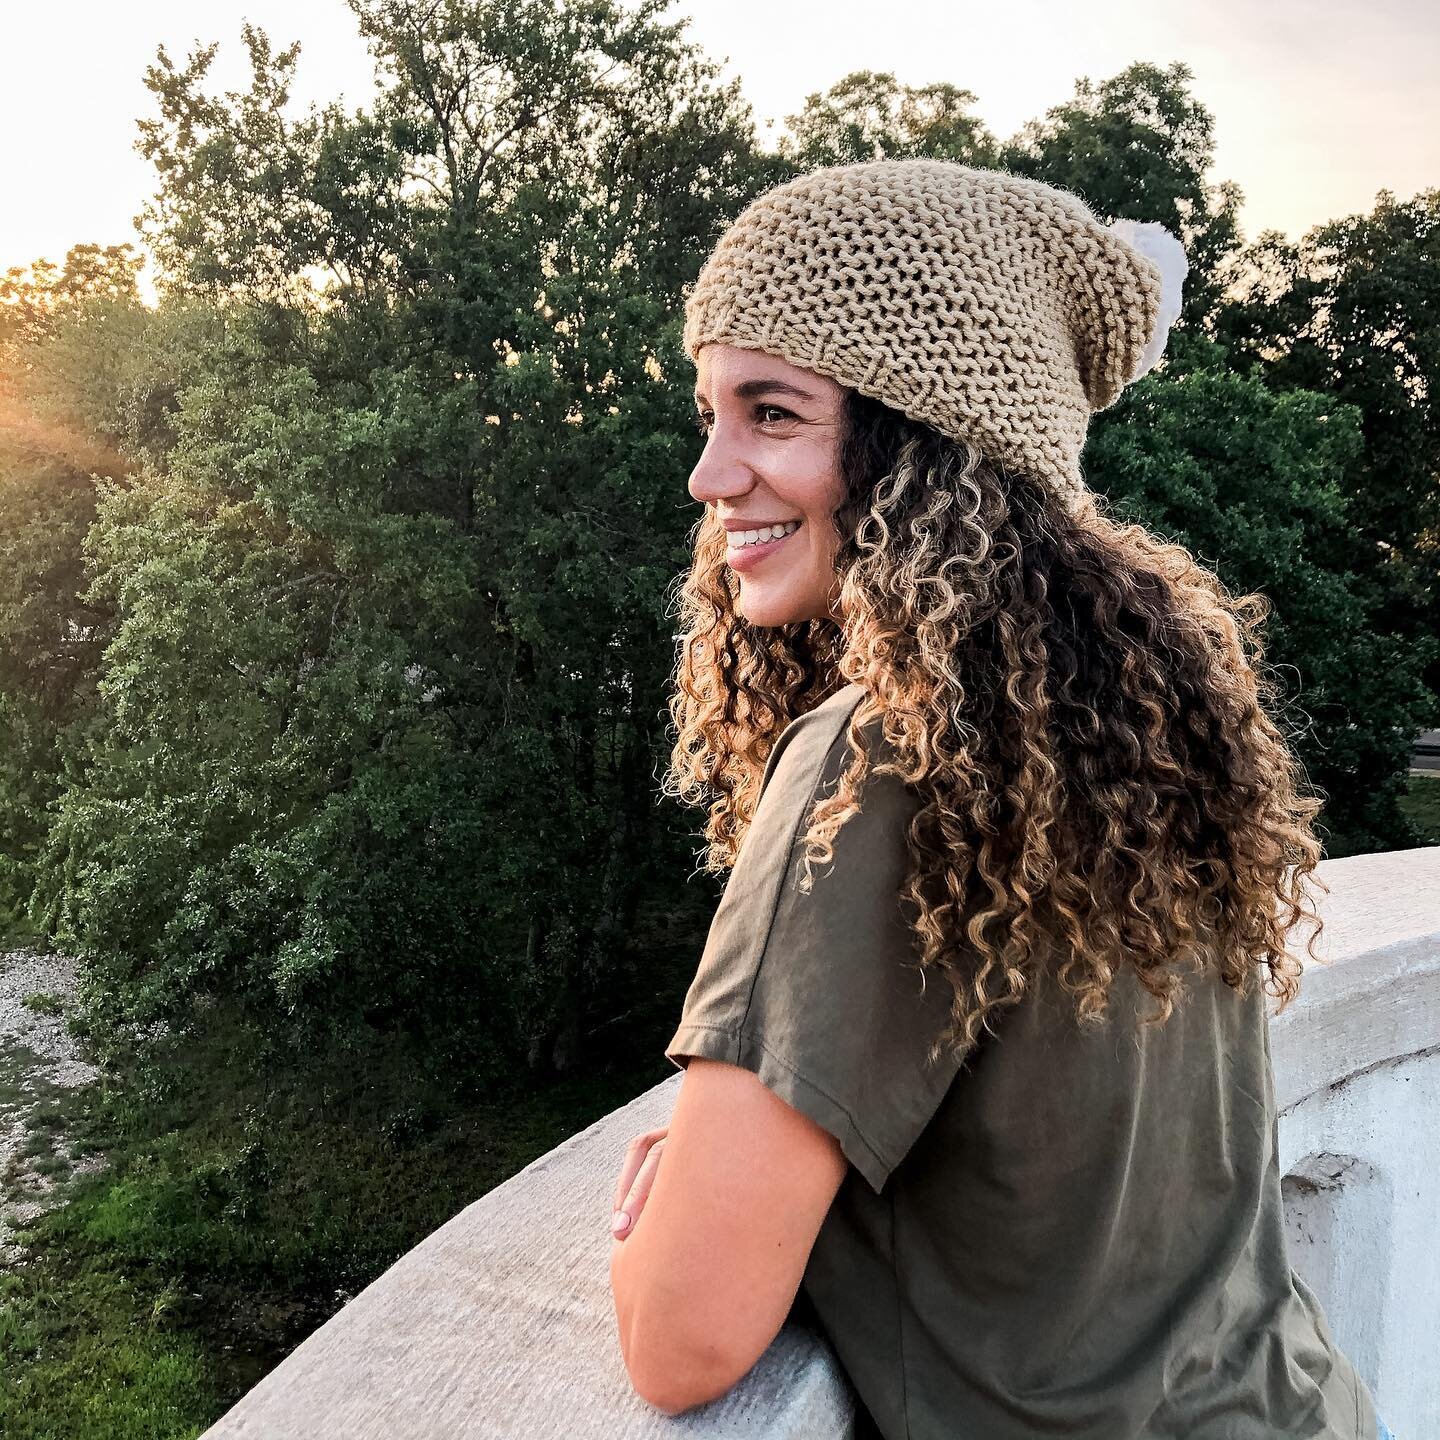 My beautiful sister in her favorite from the collection, the Bordeaux Beanie in Wheat 🌾✨

She loves this one because she can wear her voluminous, curly hair down and the beanie doesn&rsquo;t feel too tight or press down her thick curls! Where my fel